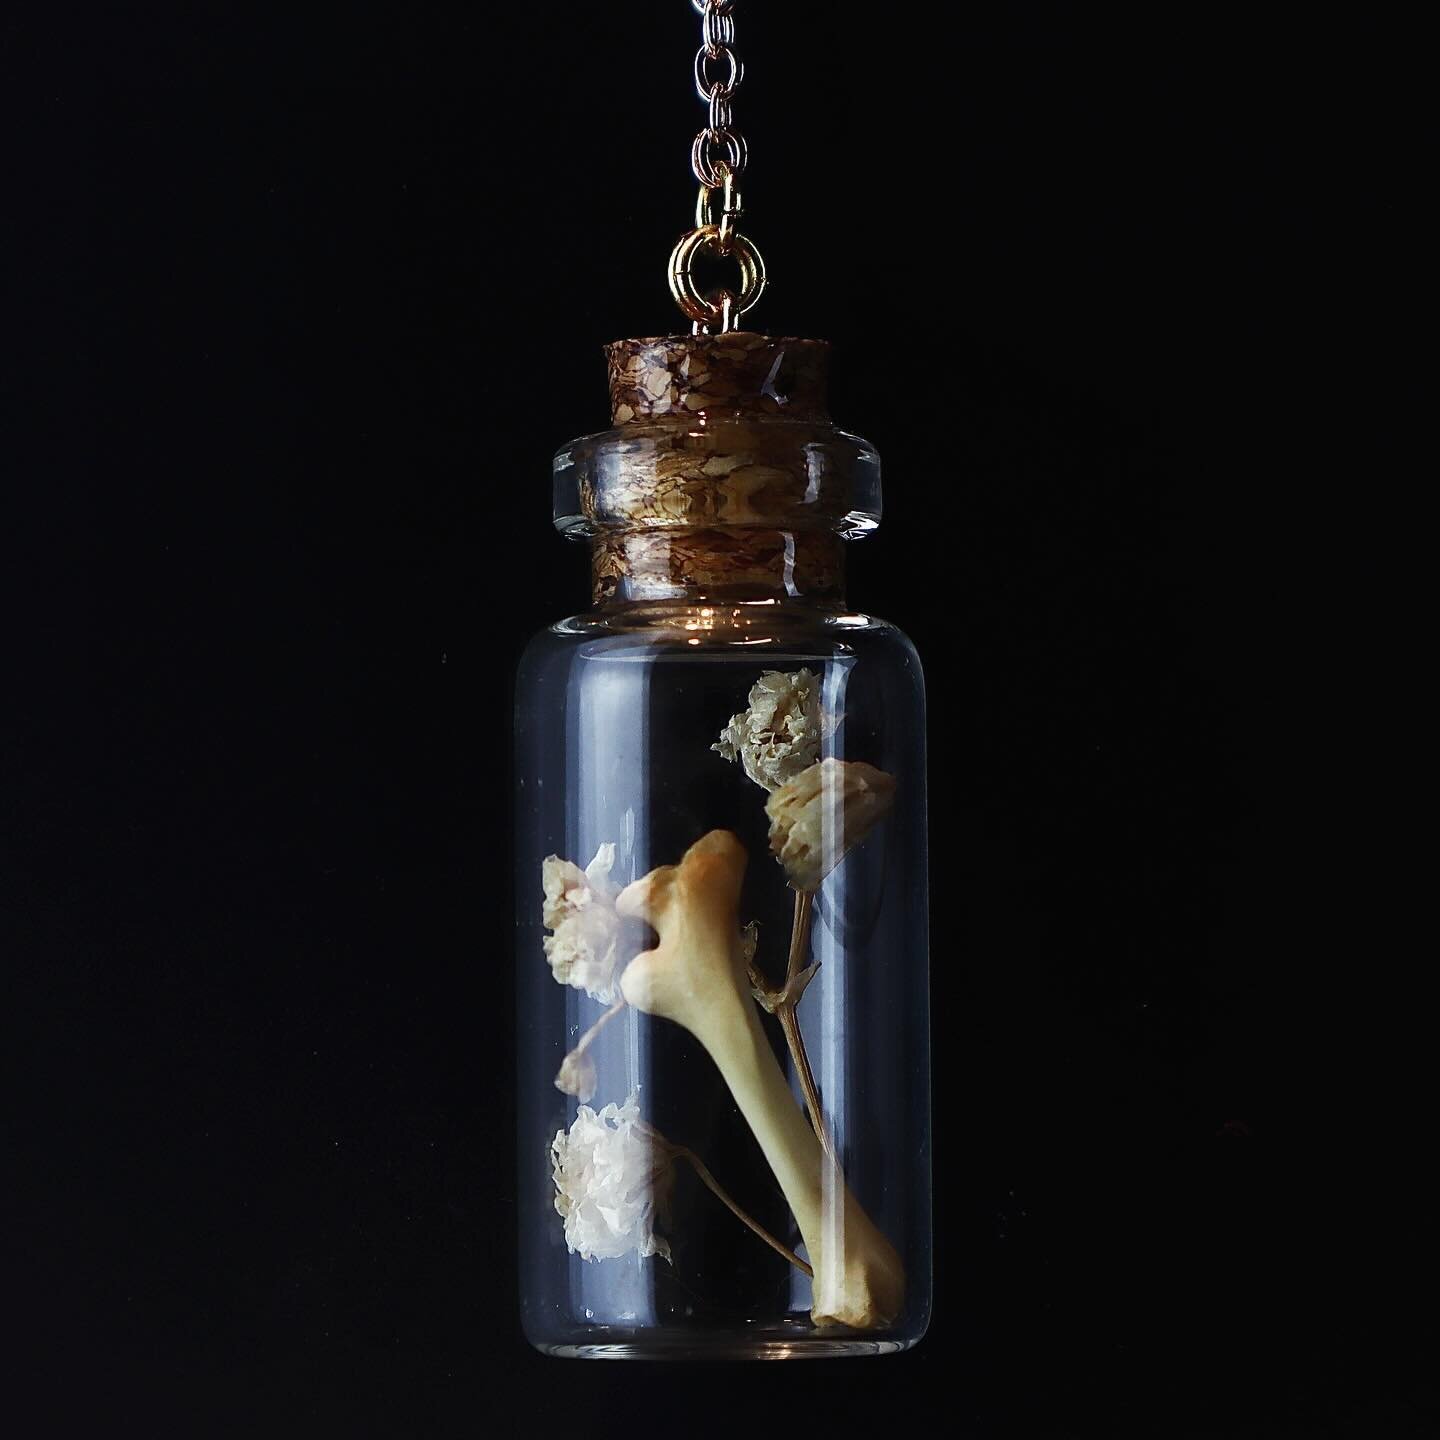 mouse femur and baby&rsquo;s breath necklaces available on my website. All bones are ethically sourced from owl pellets.